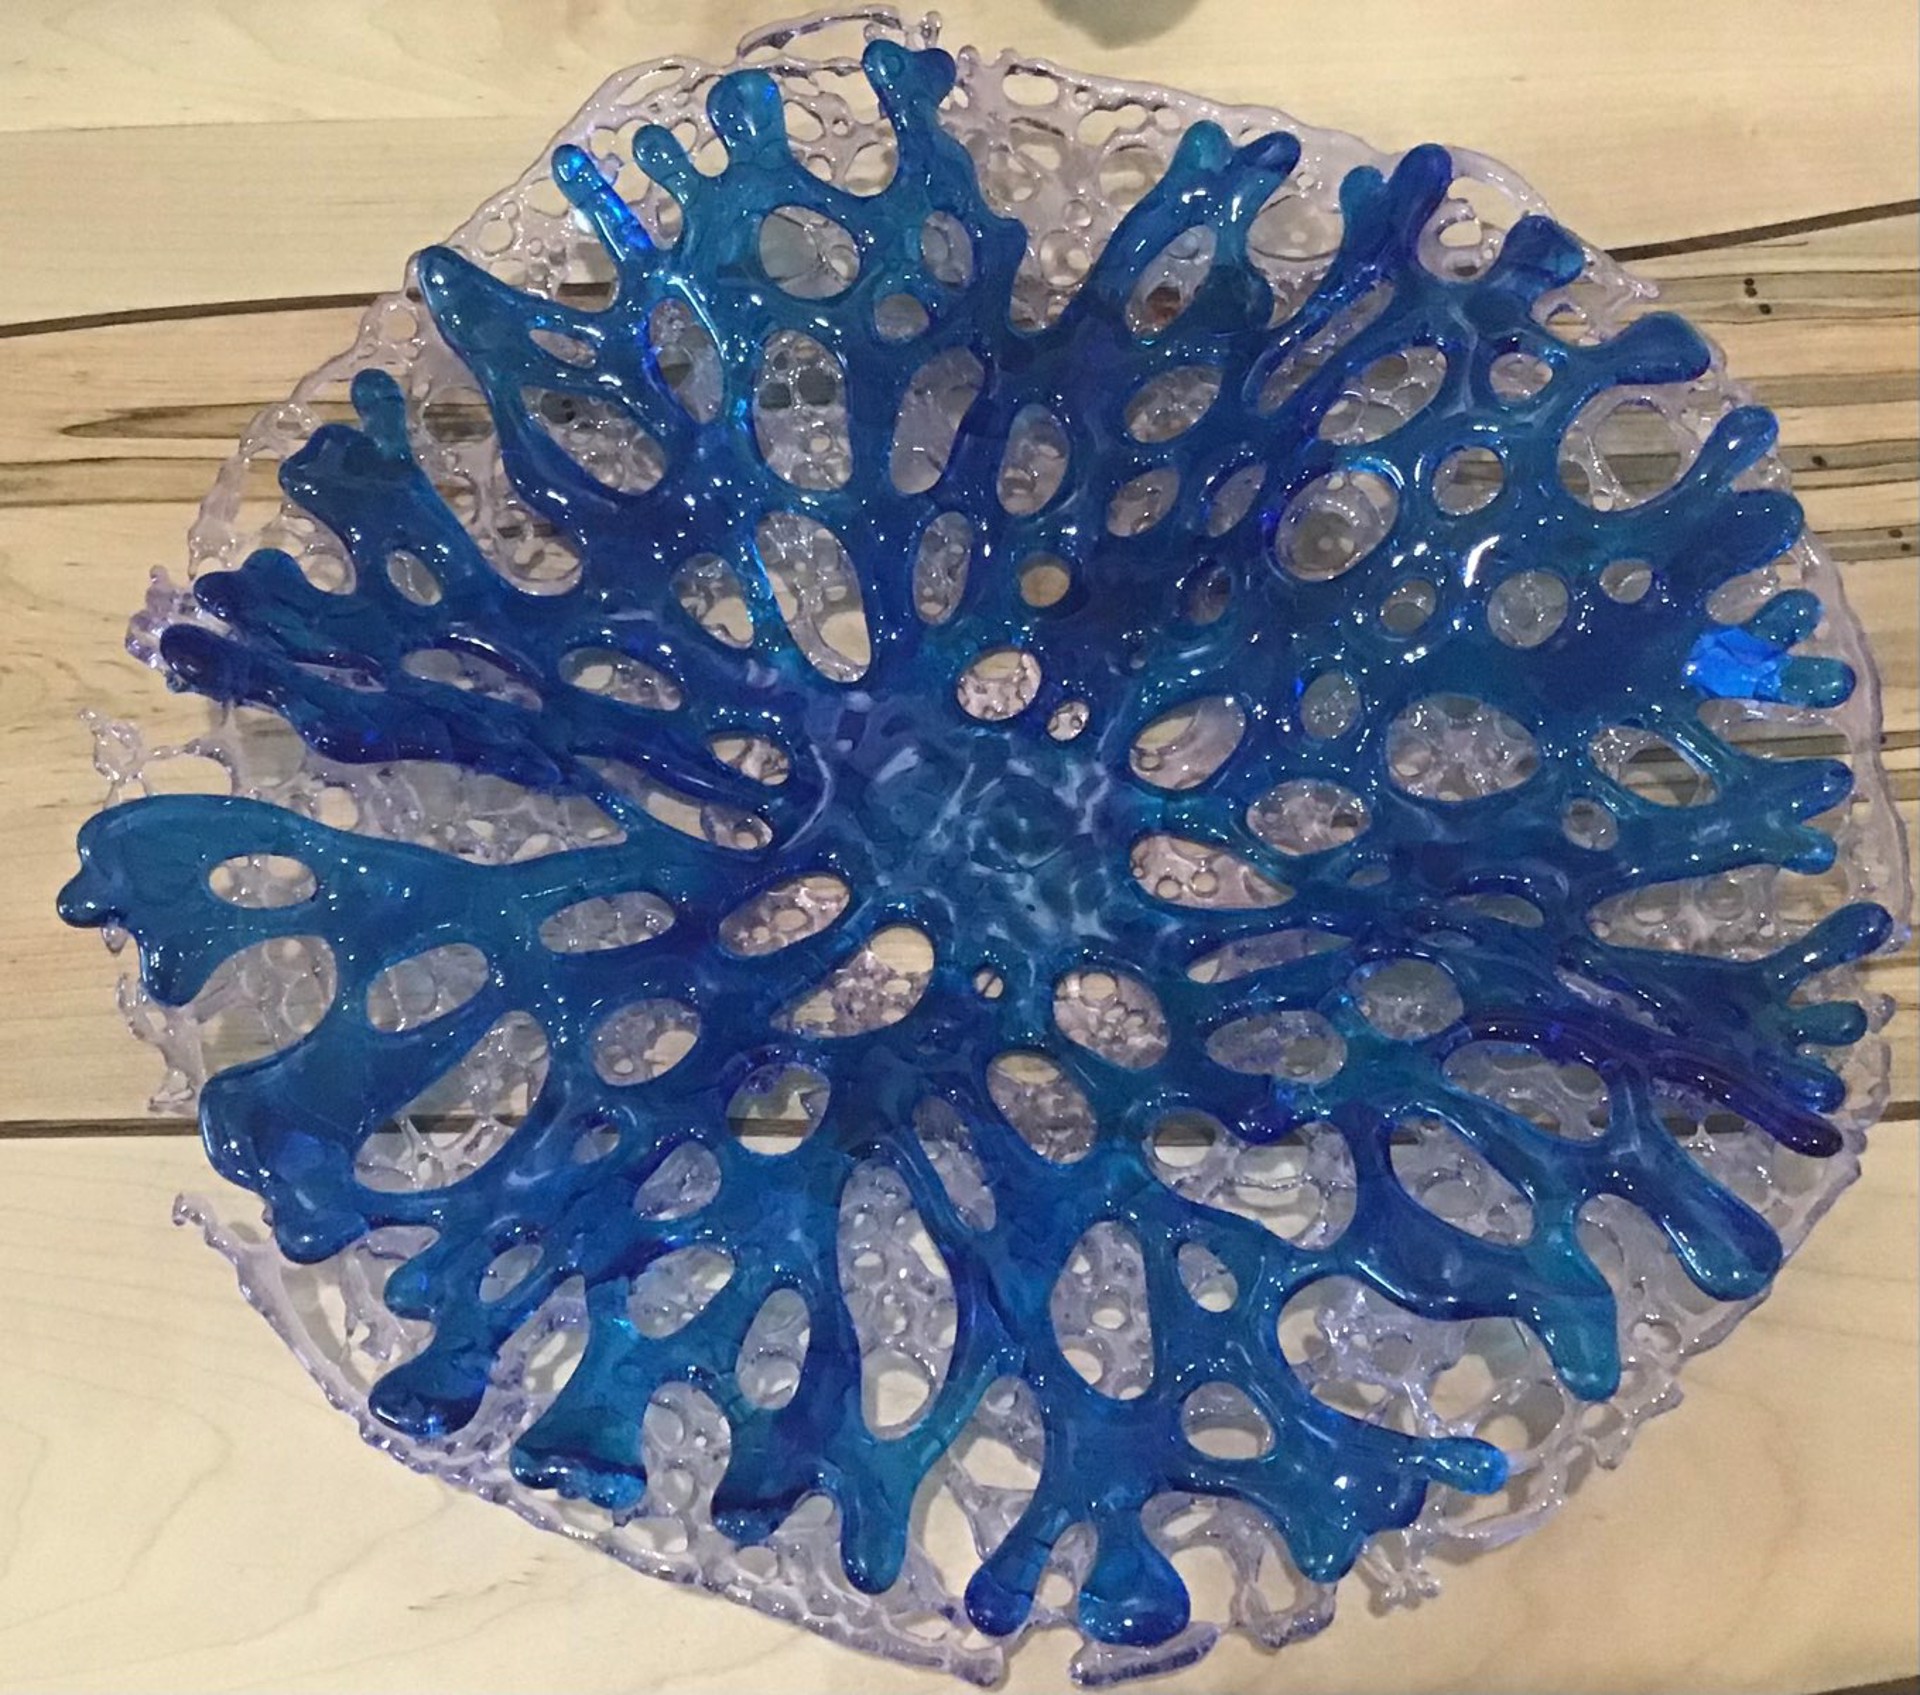 Blue Coral Bowl w/ glass lace by Marian Pyron